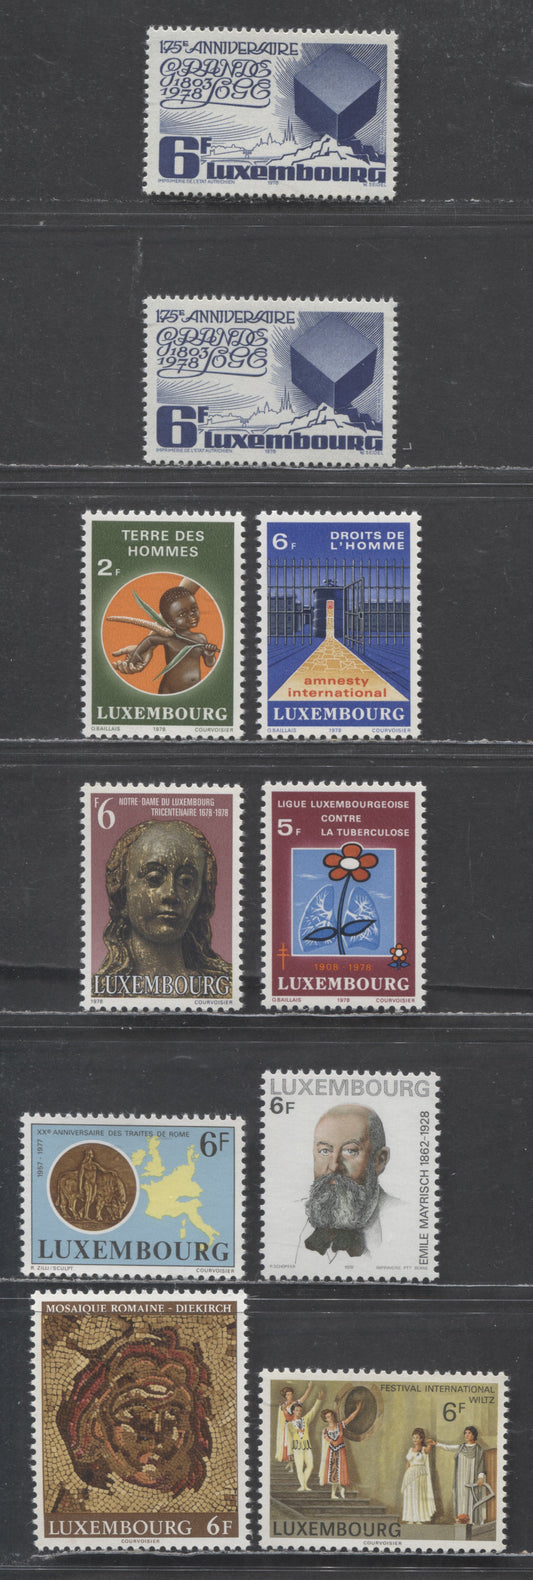 Luxembourg SC#604/617 1977-1978 Mosaic & Masonic Grand Lodge Issues, Including Paper Varieties On #617, Which Is Both HF/LF & HF-fl/MF-fl, 10 VFNH Singles, Click on Listing to See ALL Pictures, 2022 Scott Classic Cat. $6 USD